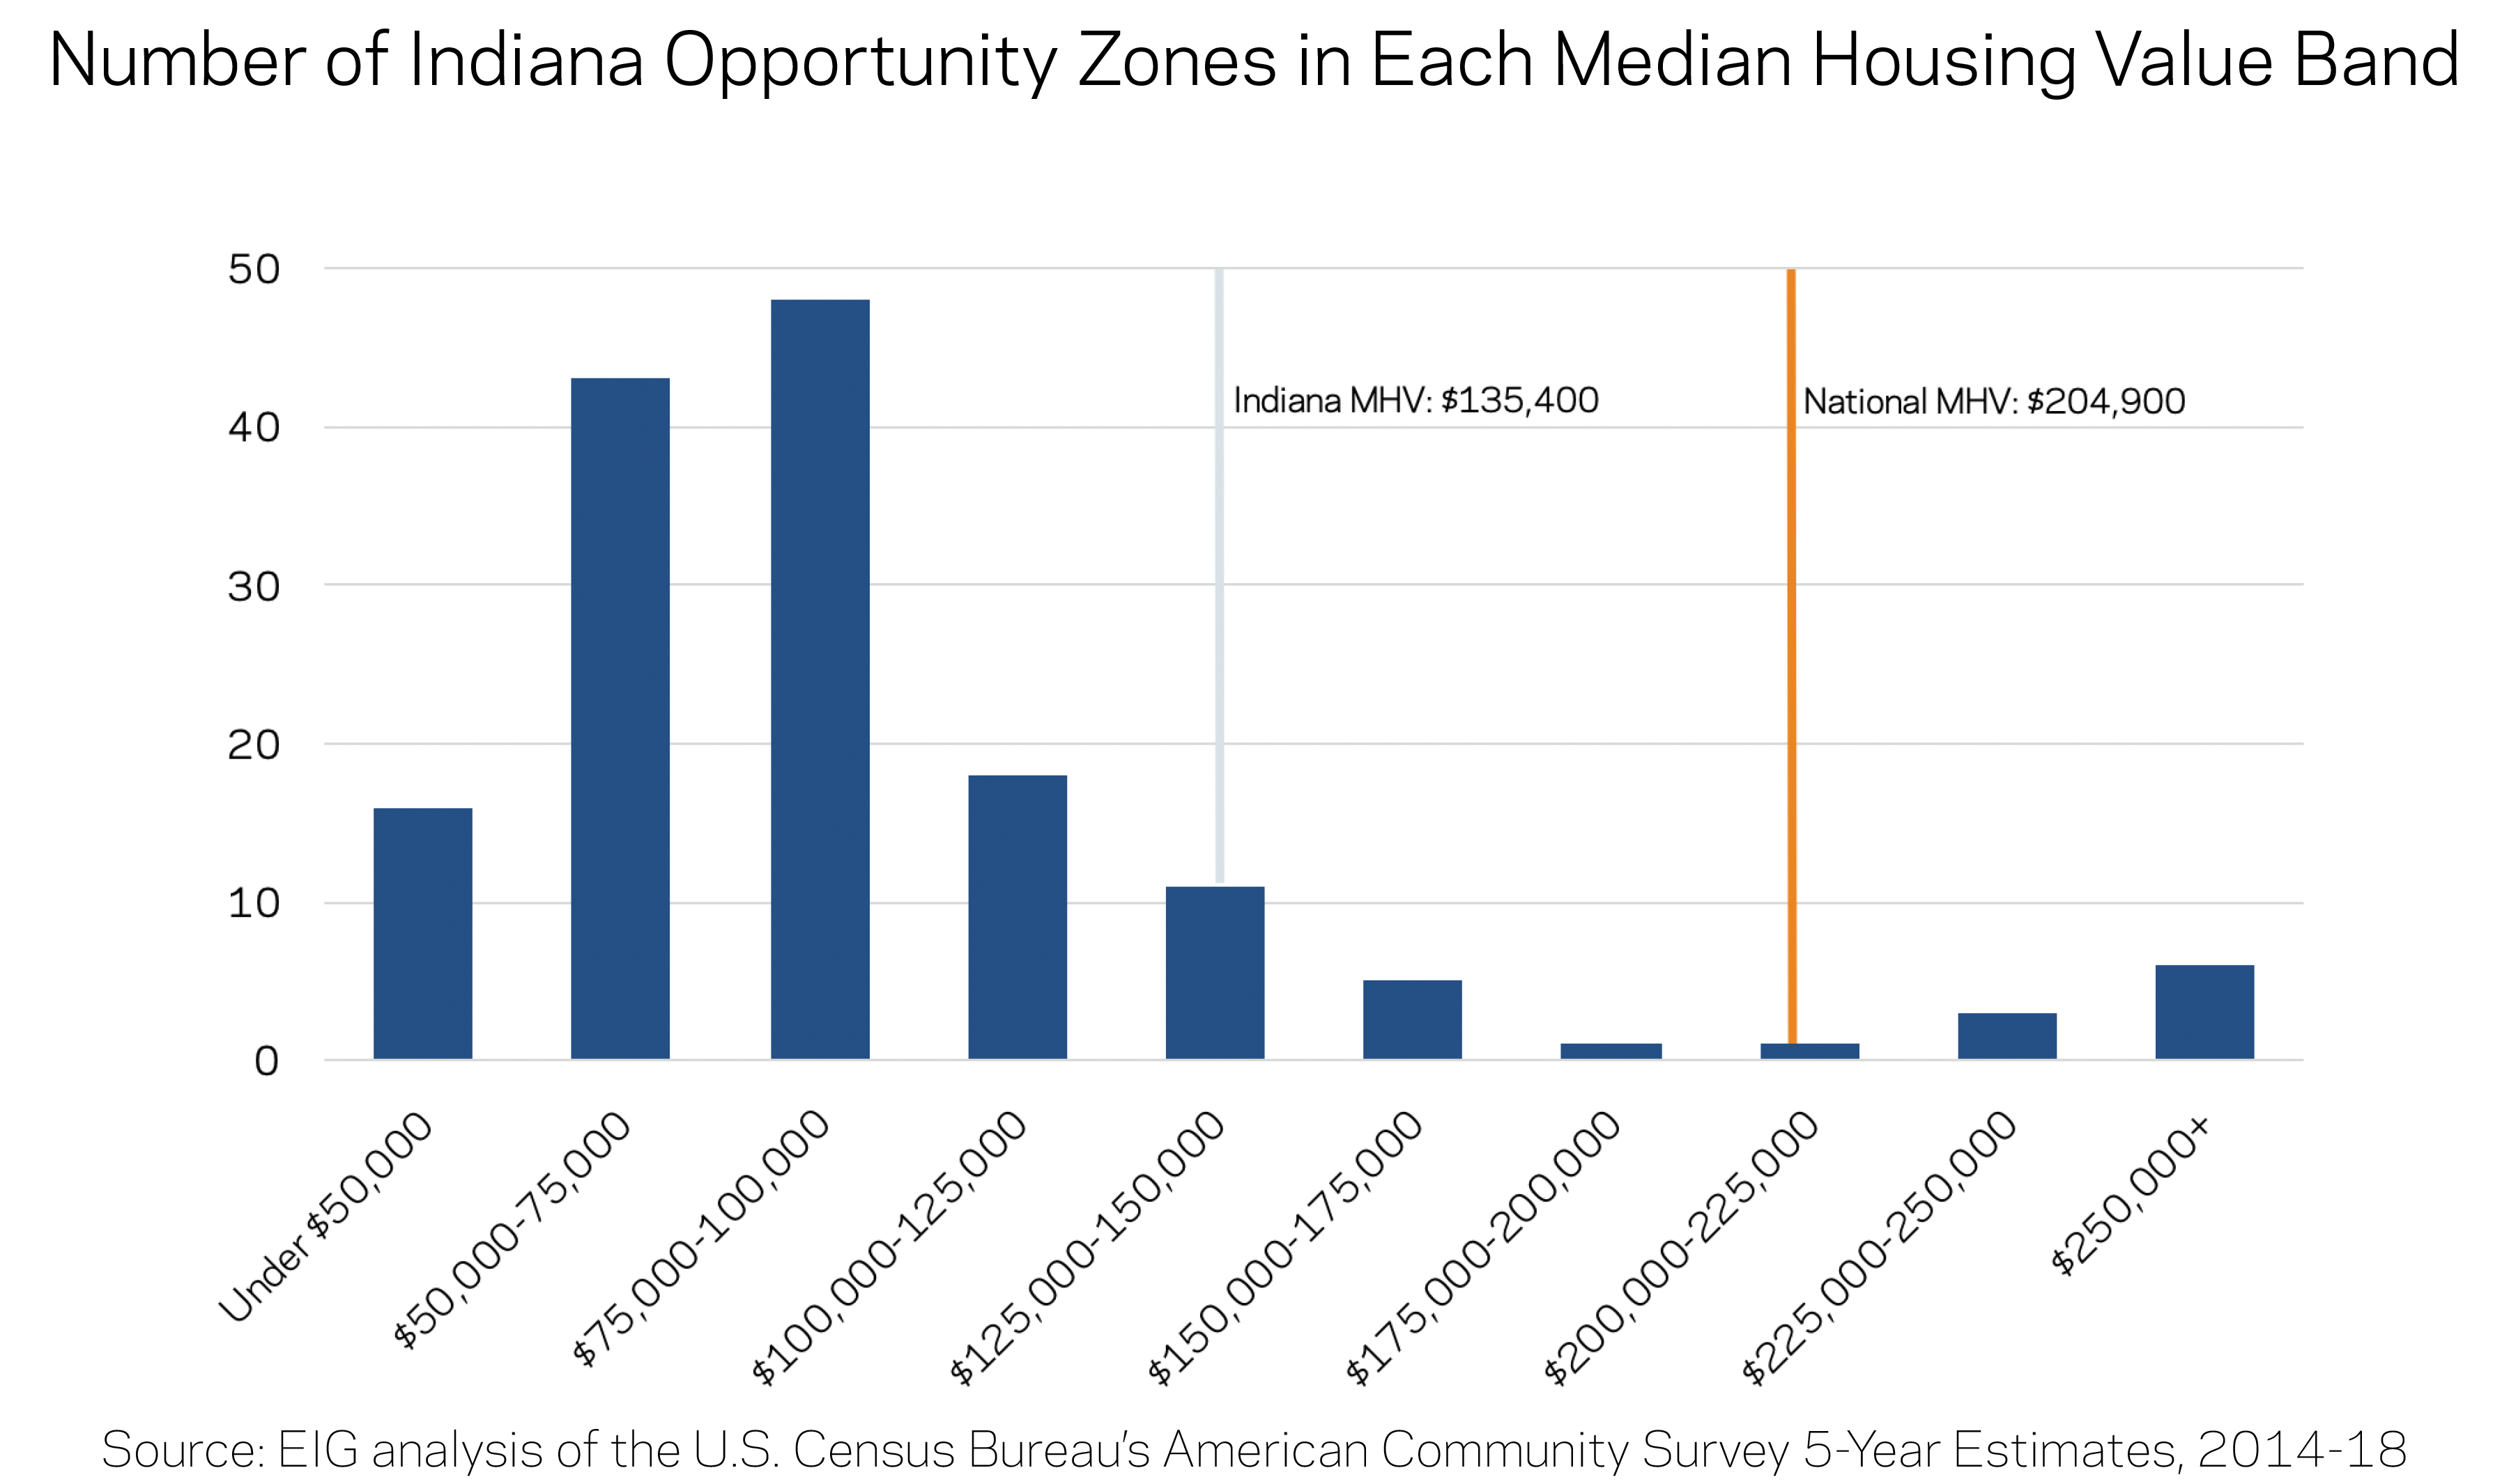 Number of Opportunity Zones in Each Median Housing Value Band